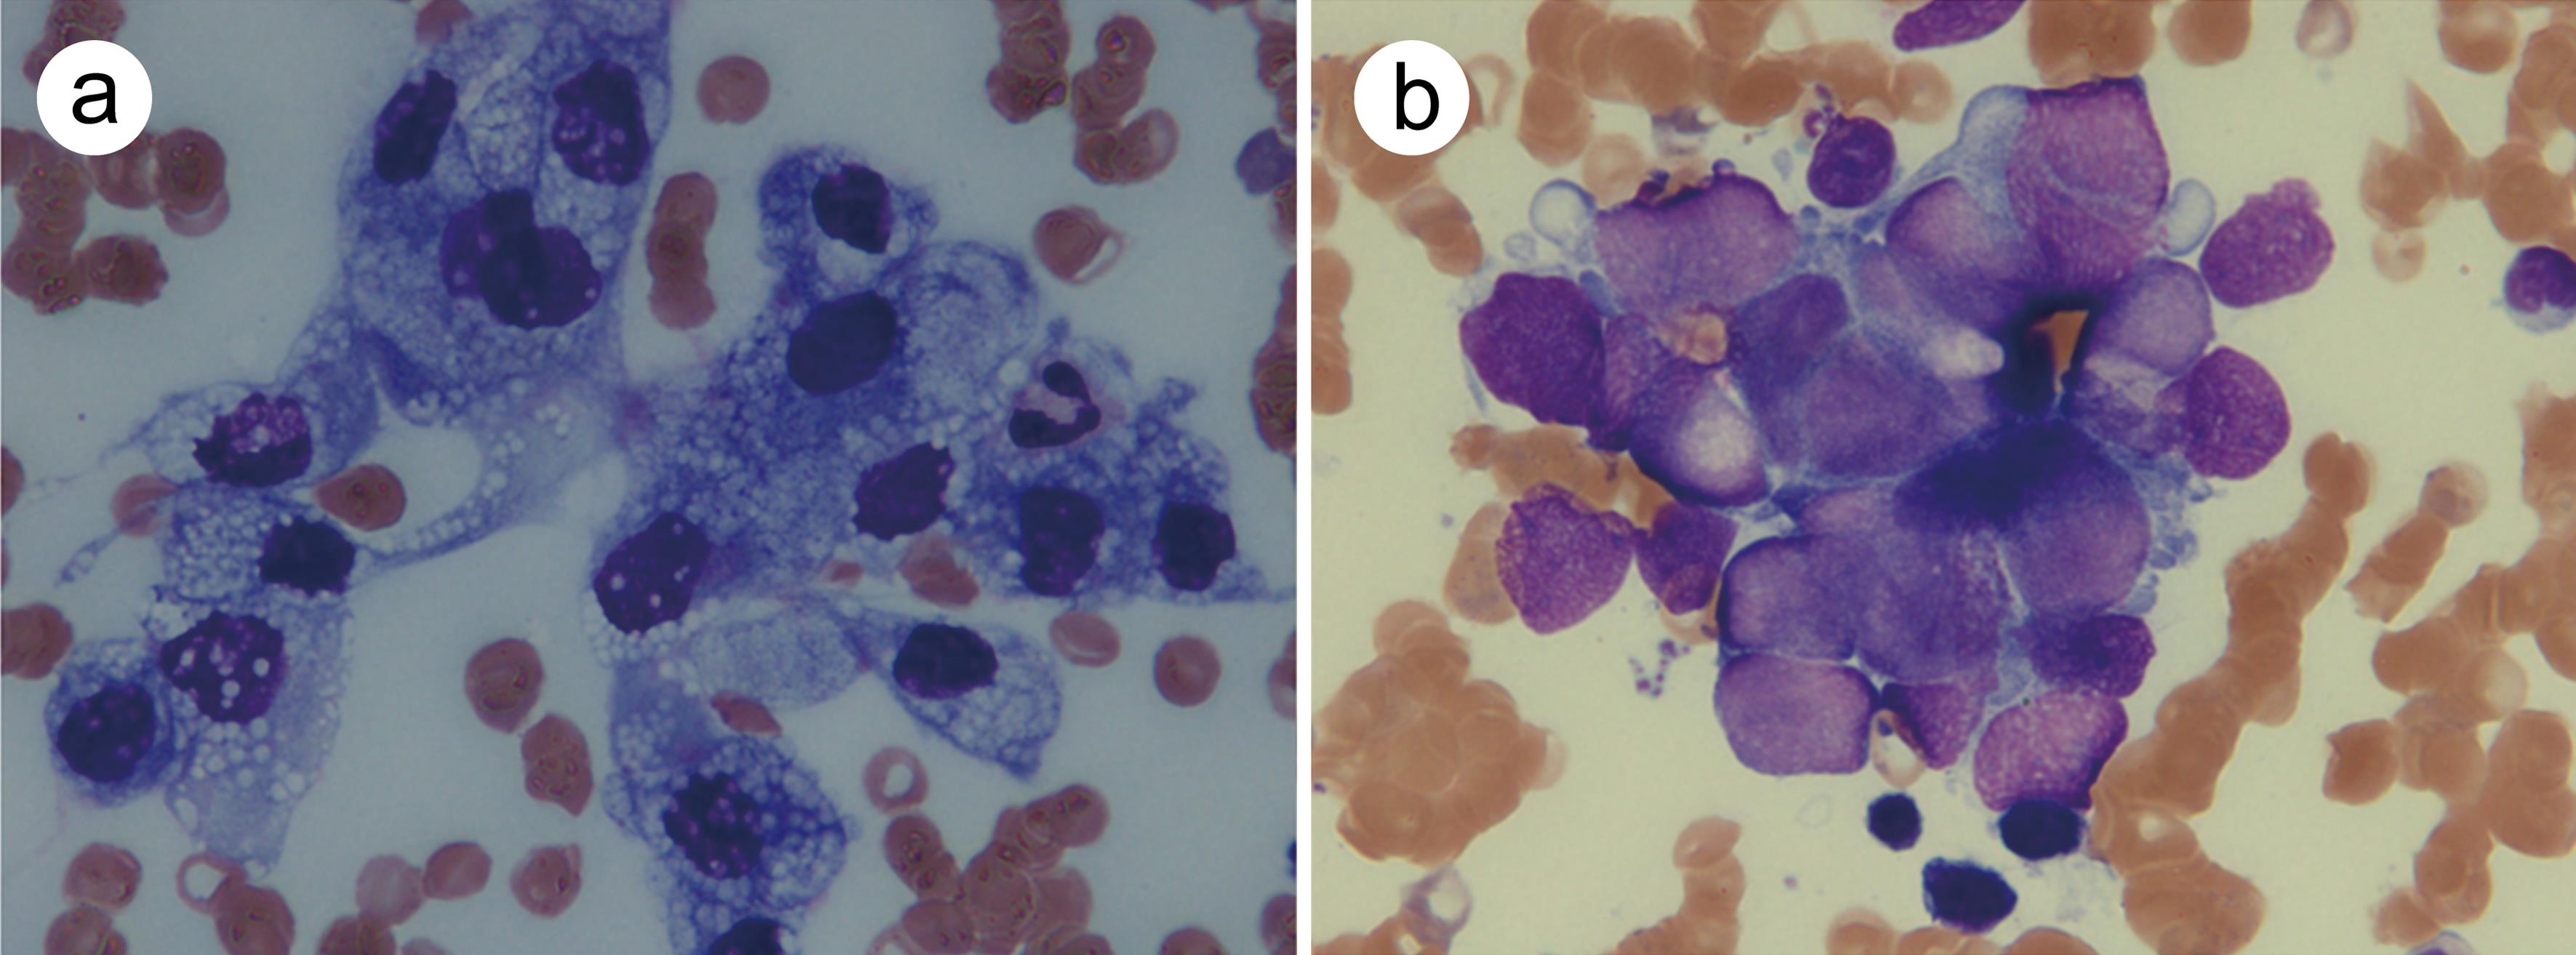 Bone marrow smear revealed (a) Case 1, poorly differentiated adenocarcinoma; (b) Case 2, undifferentiated carcinoma (May Giemsa stain; original magnification, ×1,000).